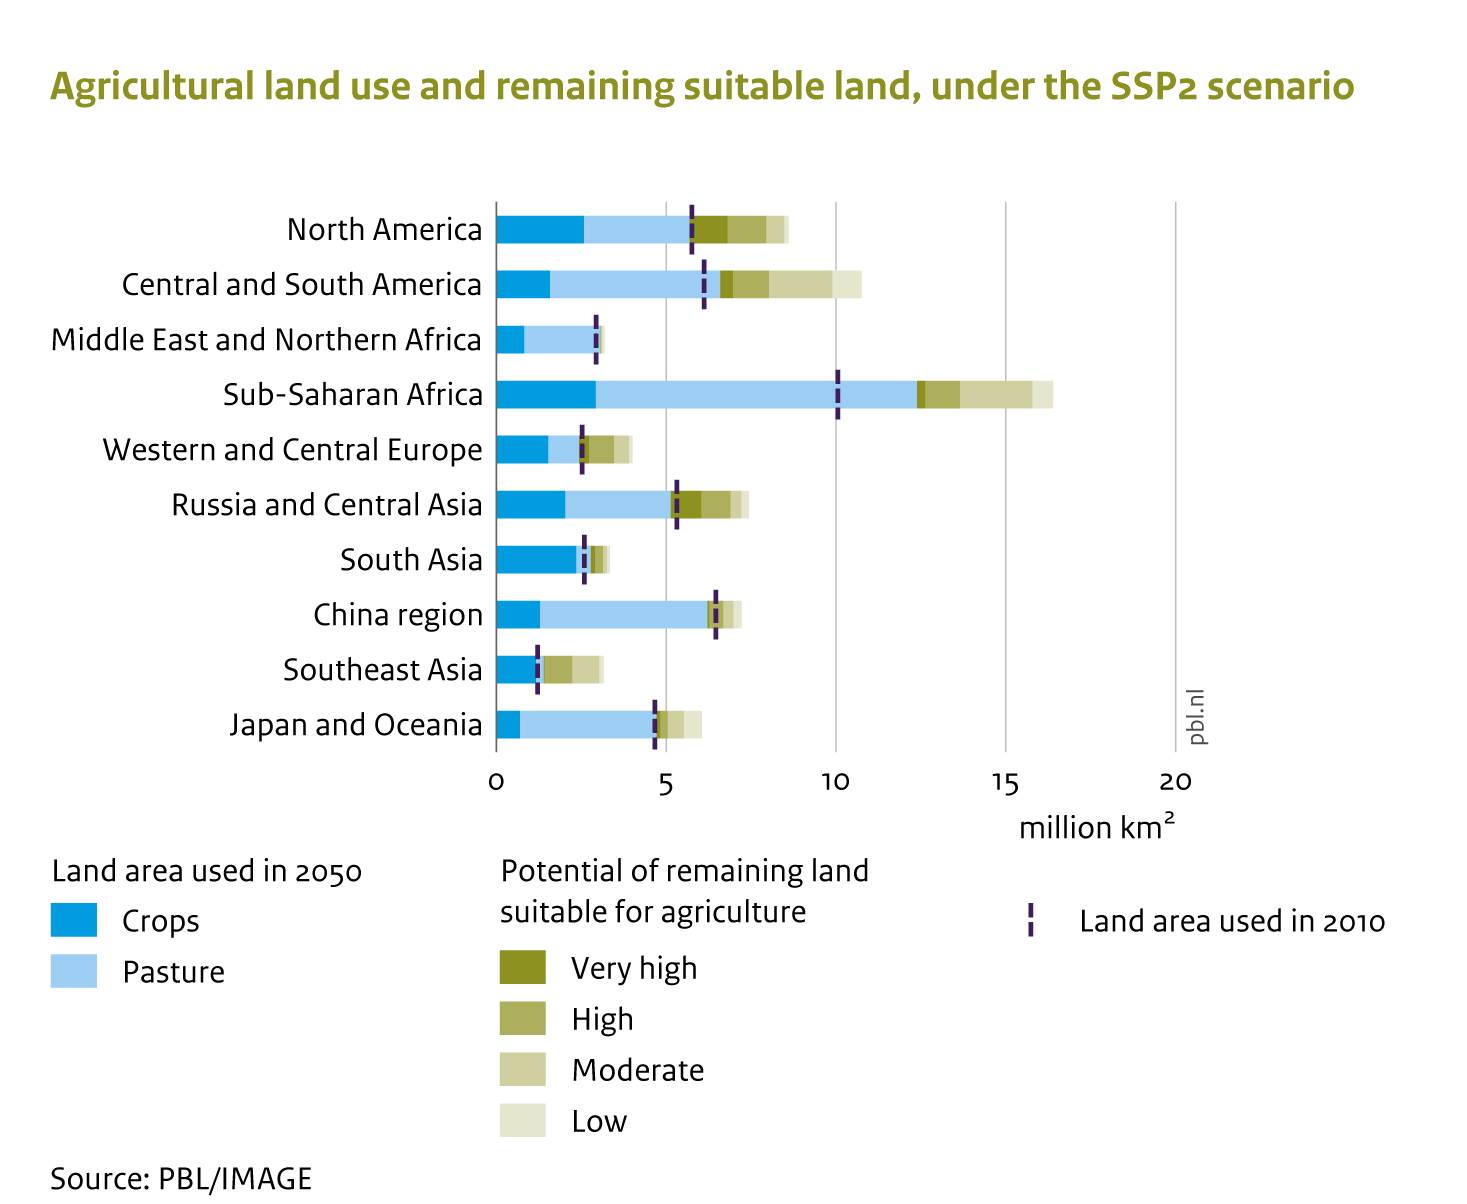 Most of the highly productive lands are already in useLand for agricultural expansion is still rather abundant in many regions, although 9 out of 10 regions have already taken a major share of suitable agricultural land in production. In China, South Asia, the Middle East and Northern Africa, currently, agriculture occupies more than 80% of the land available and suitable for agriculture.In the SSP2 scenario, the increase in agricultural land use is projected to be largest in Sub-Saharan Africa. Smaller increases are projected to take place in Central and South America, South Asia and Southeast Asia.